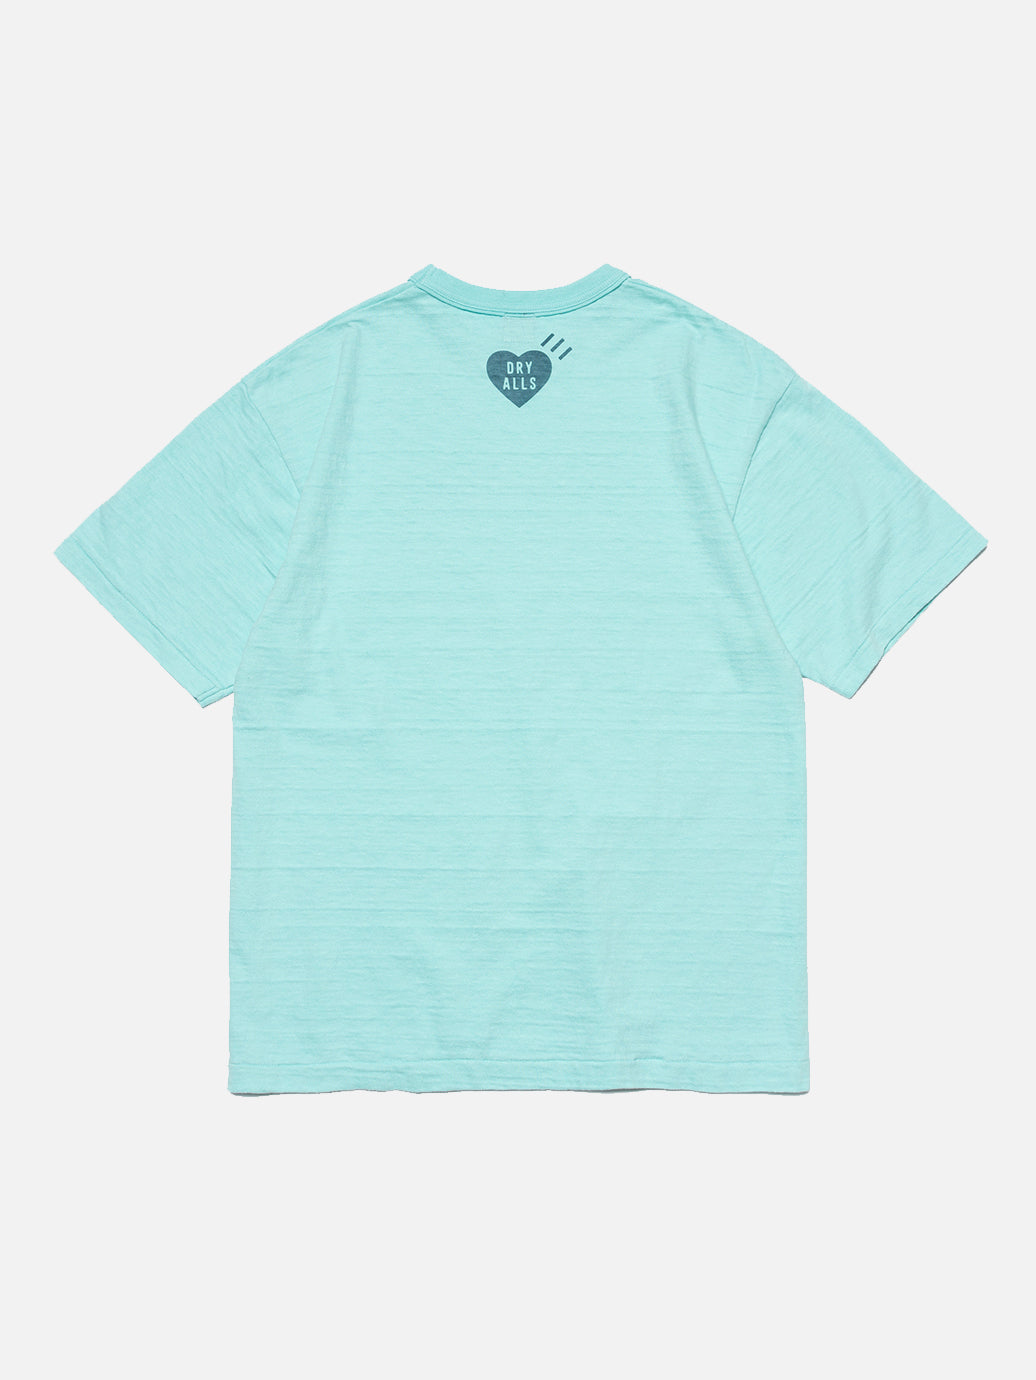 Human Made Color T-Shirt #1 – OALLERY